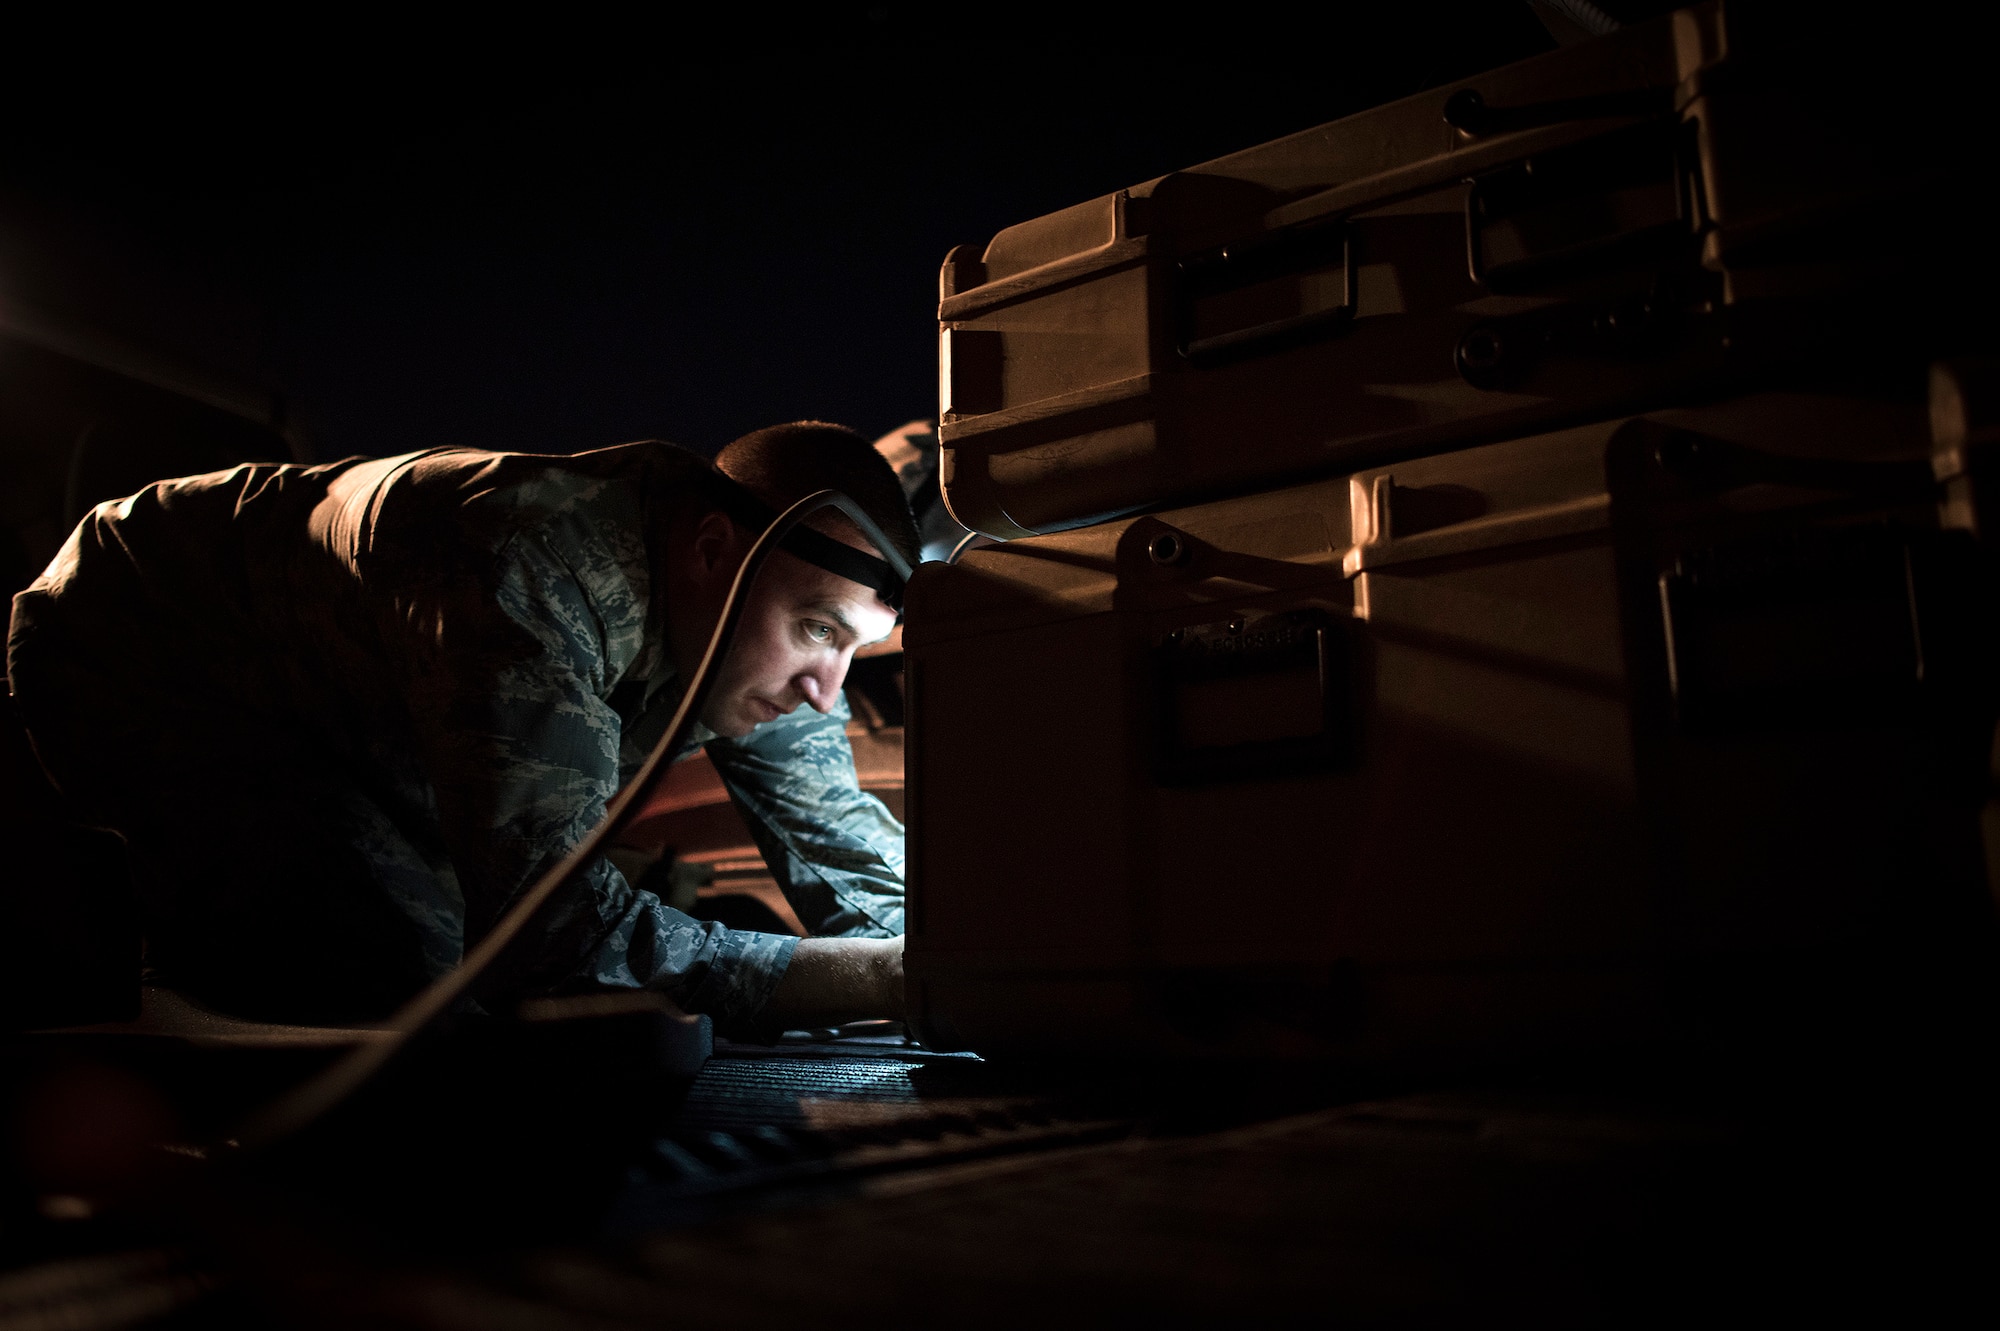 Capt. Brian Goodman, 527th Space Aggressor Squadron, ensures equipment is ready before a mission to disrupt a unit's space capabilities during exercise Red Flag, July 21, 2016 at Nellis Air Force Base, Nevada. Red Flag 16-3 is aimed at teaching service members how to integrate air, space and cyberspace elements. (U.S. Air Force photo/Tech. Sgt. David Salanitri)